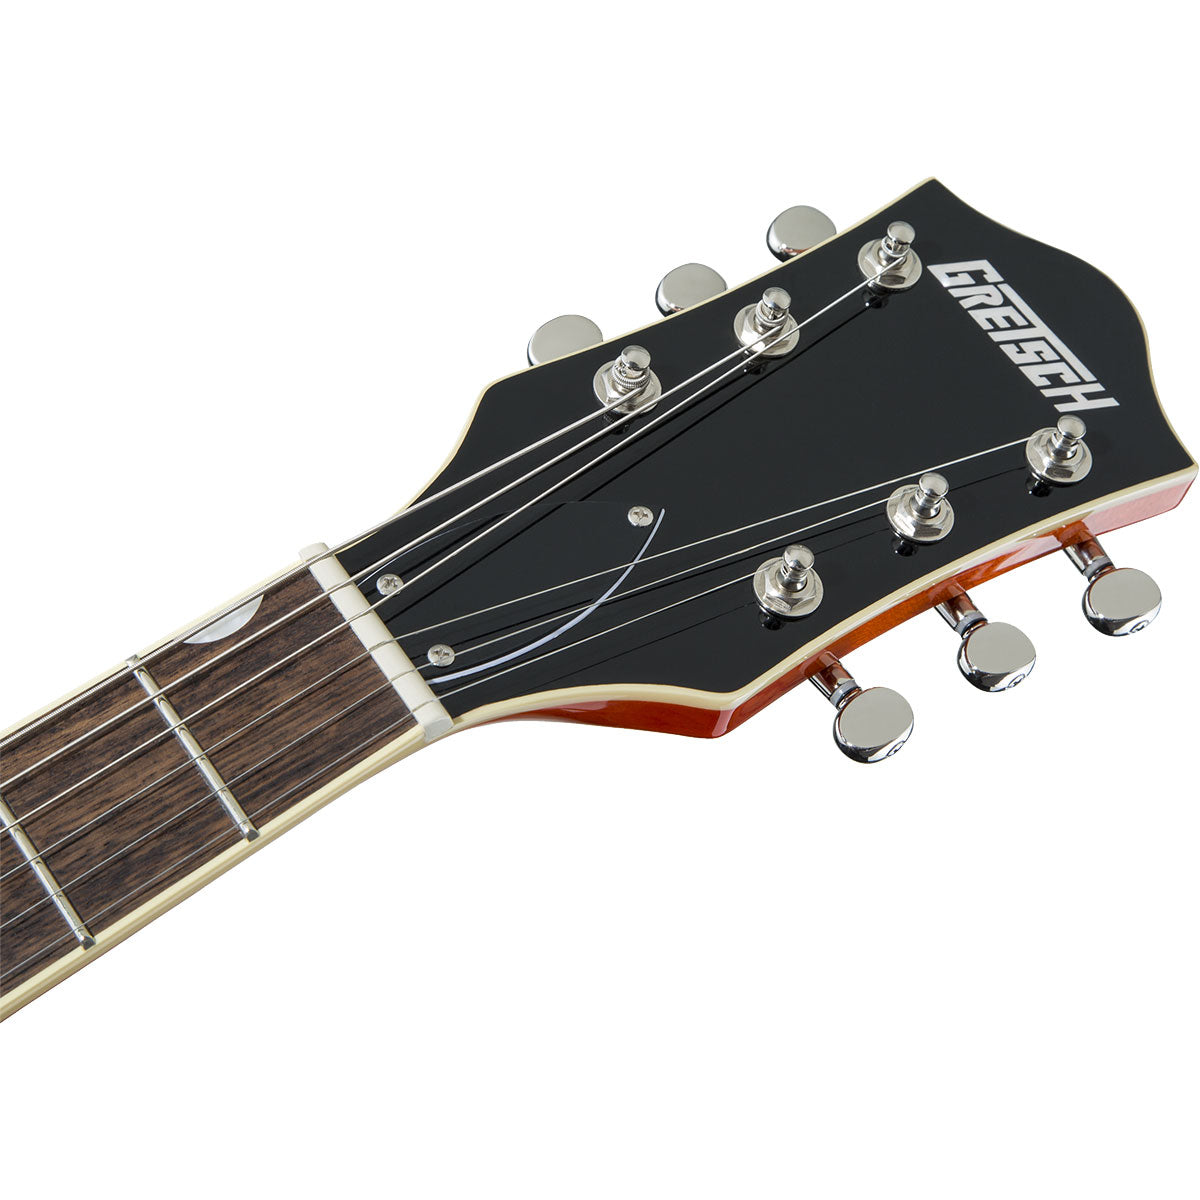 Detail view of Gretsch G5622T Electromatic Center Block Guitar - Orange Stain showing top of headstock and portion of fretboard